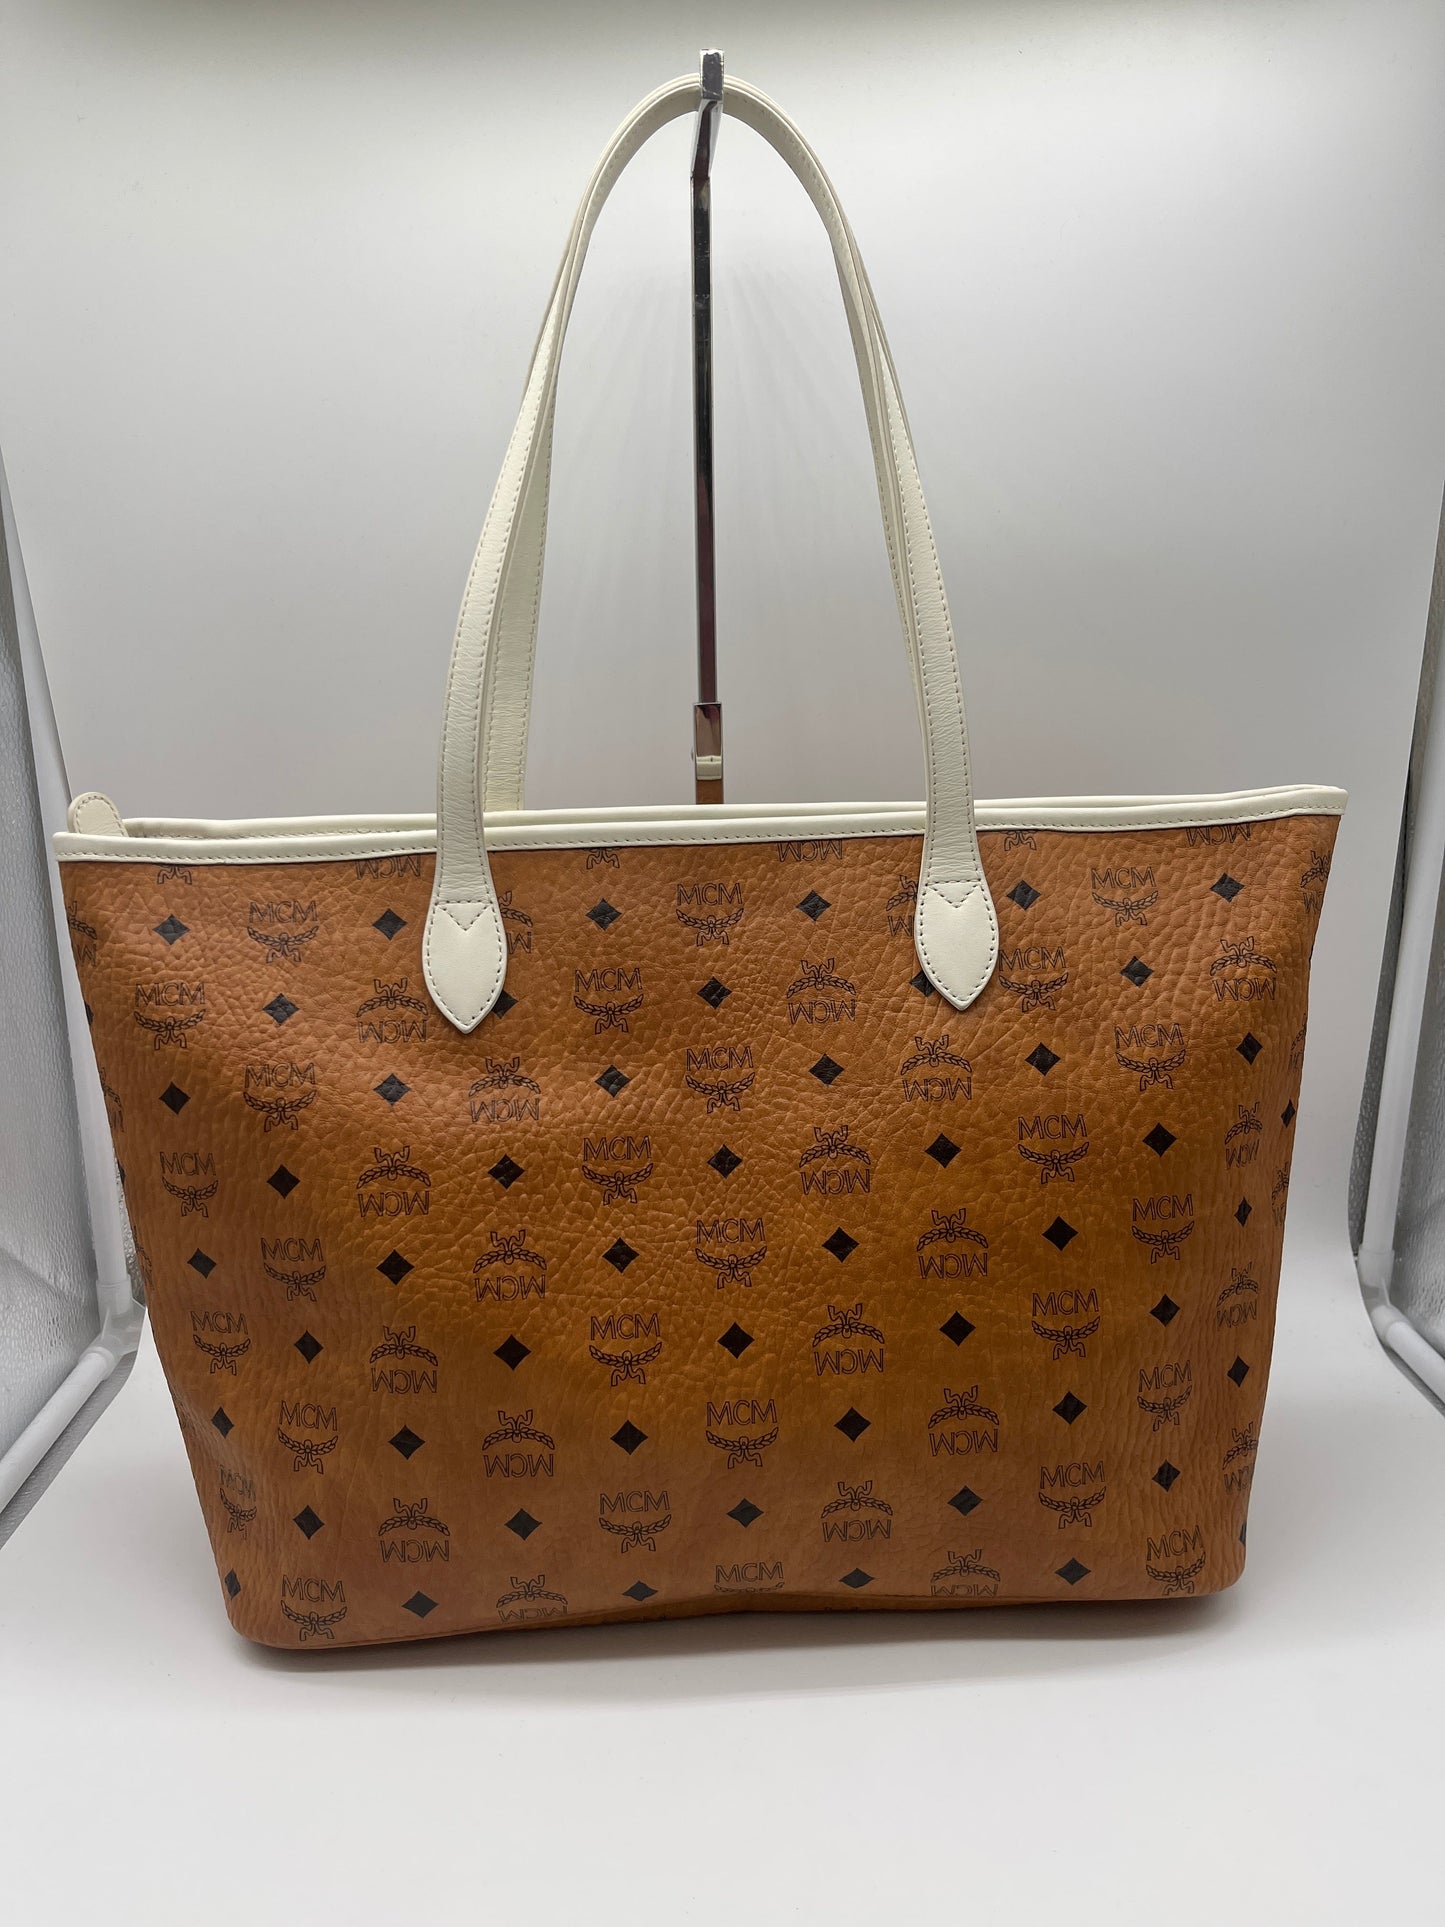 Tote Luxury Designer By Mcm  Size: Large